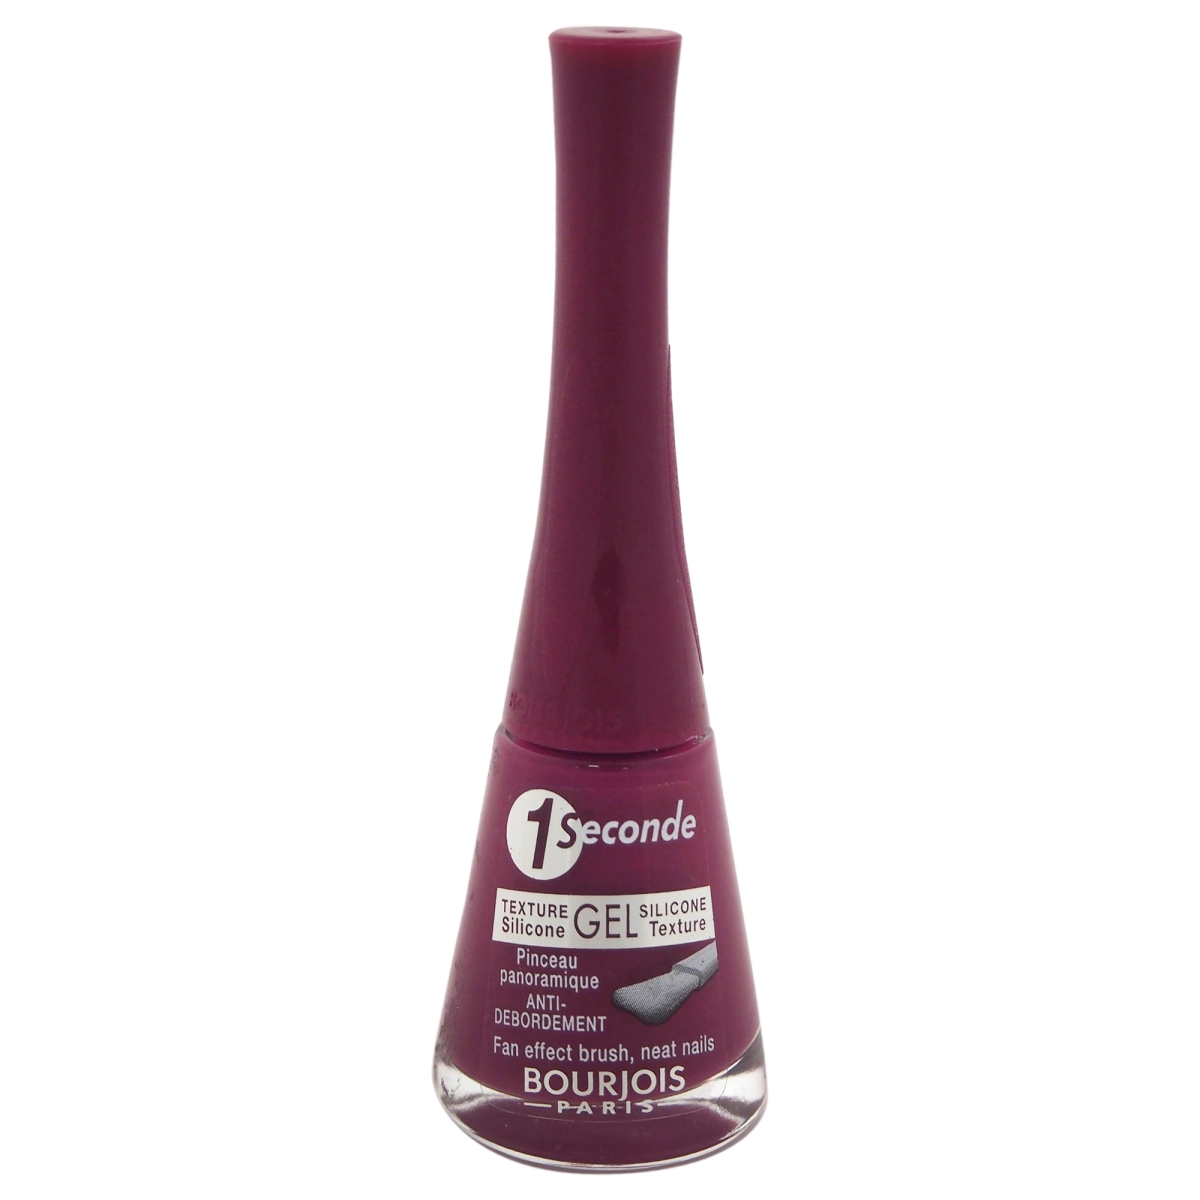 W-c-9671 0.3 Oz No. 46 1 Seconde Berry Important Person Nail Polish For Women